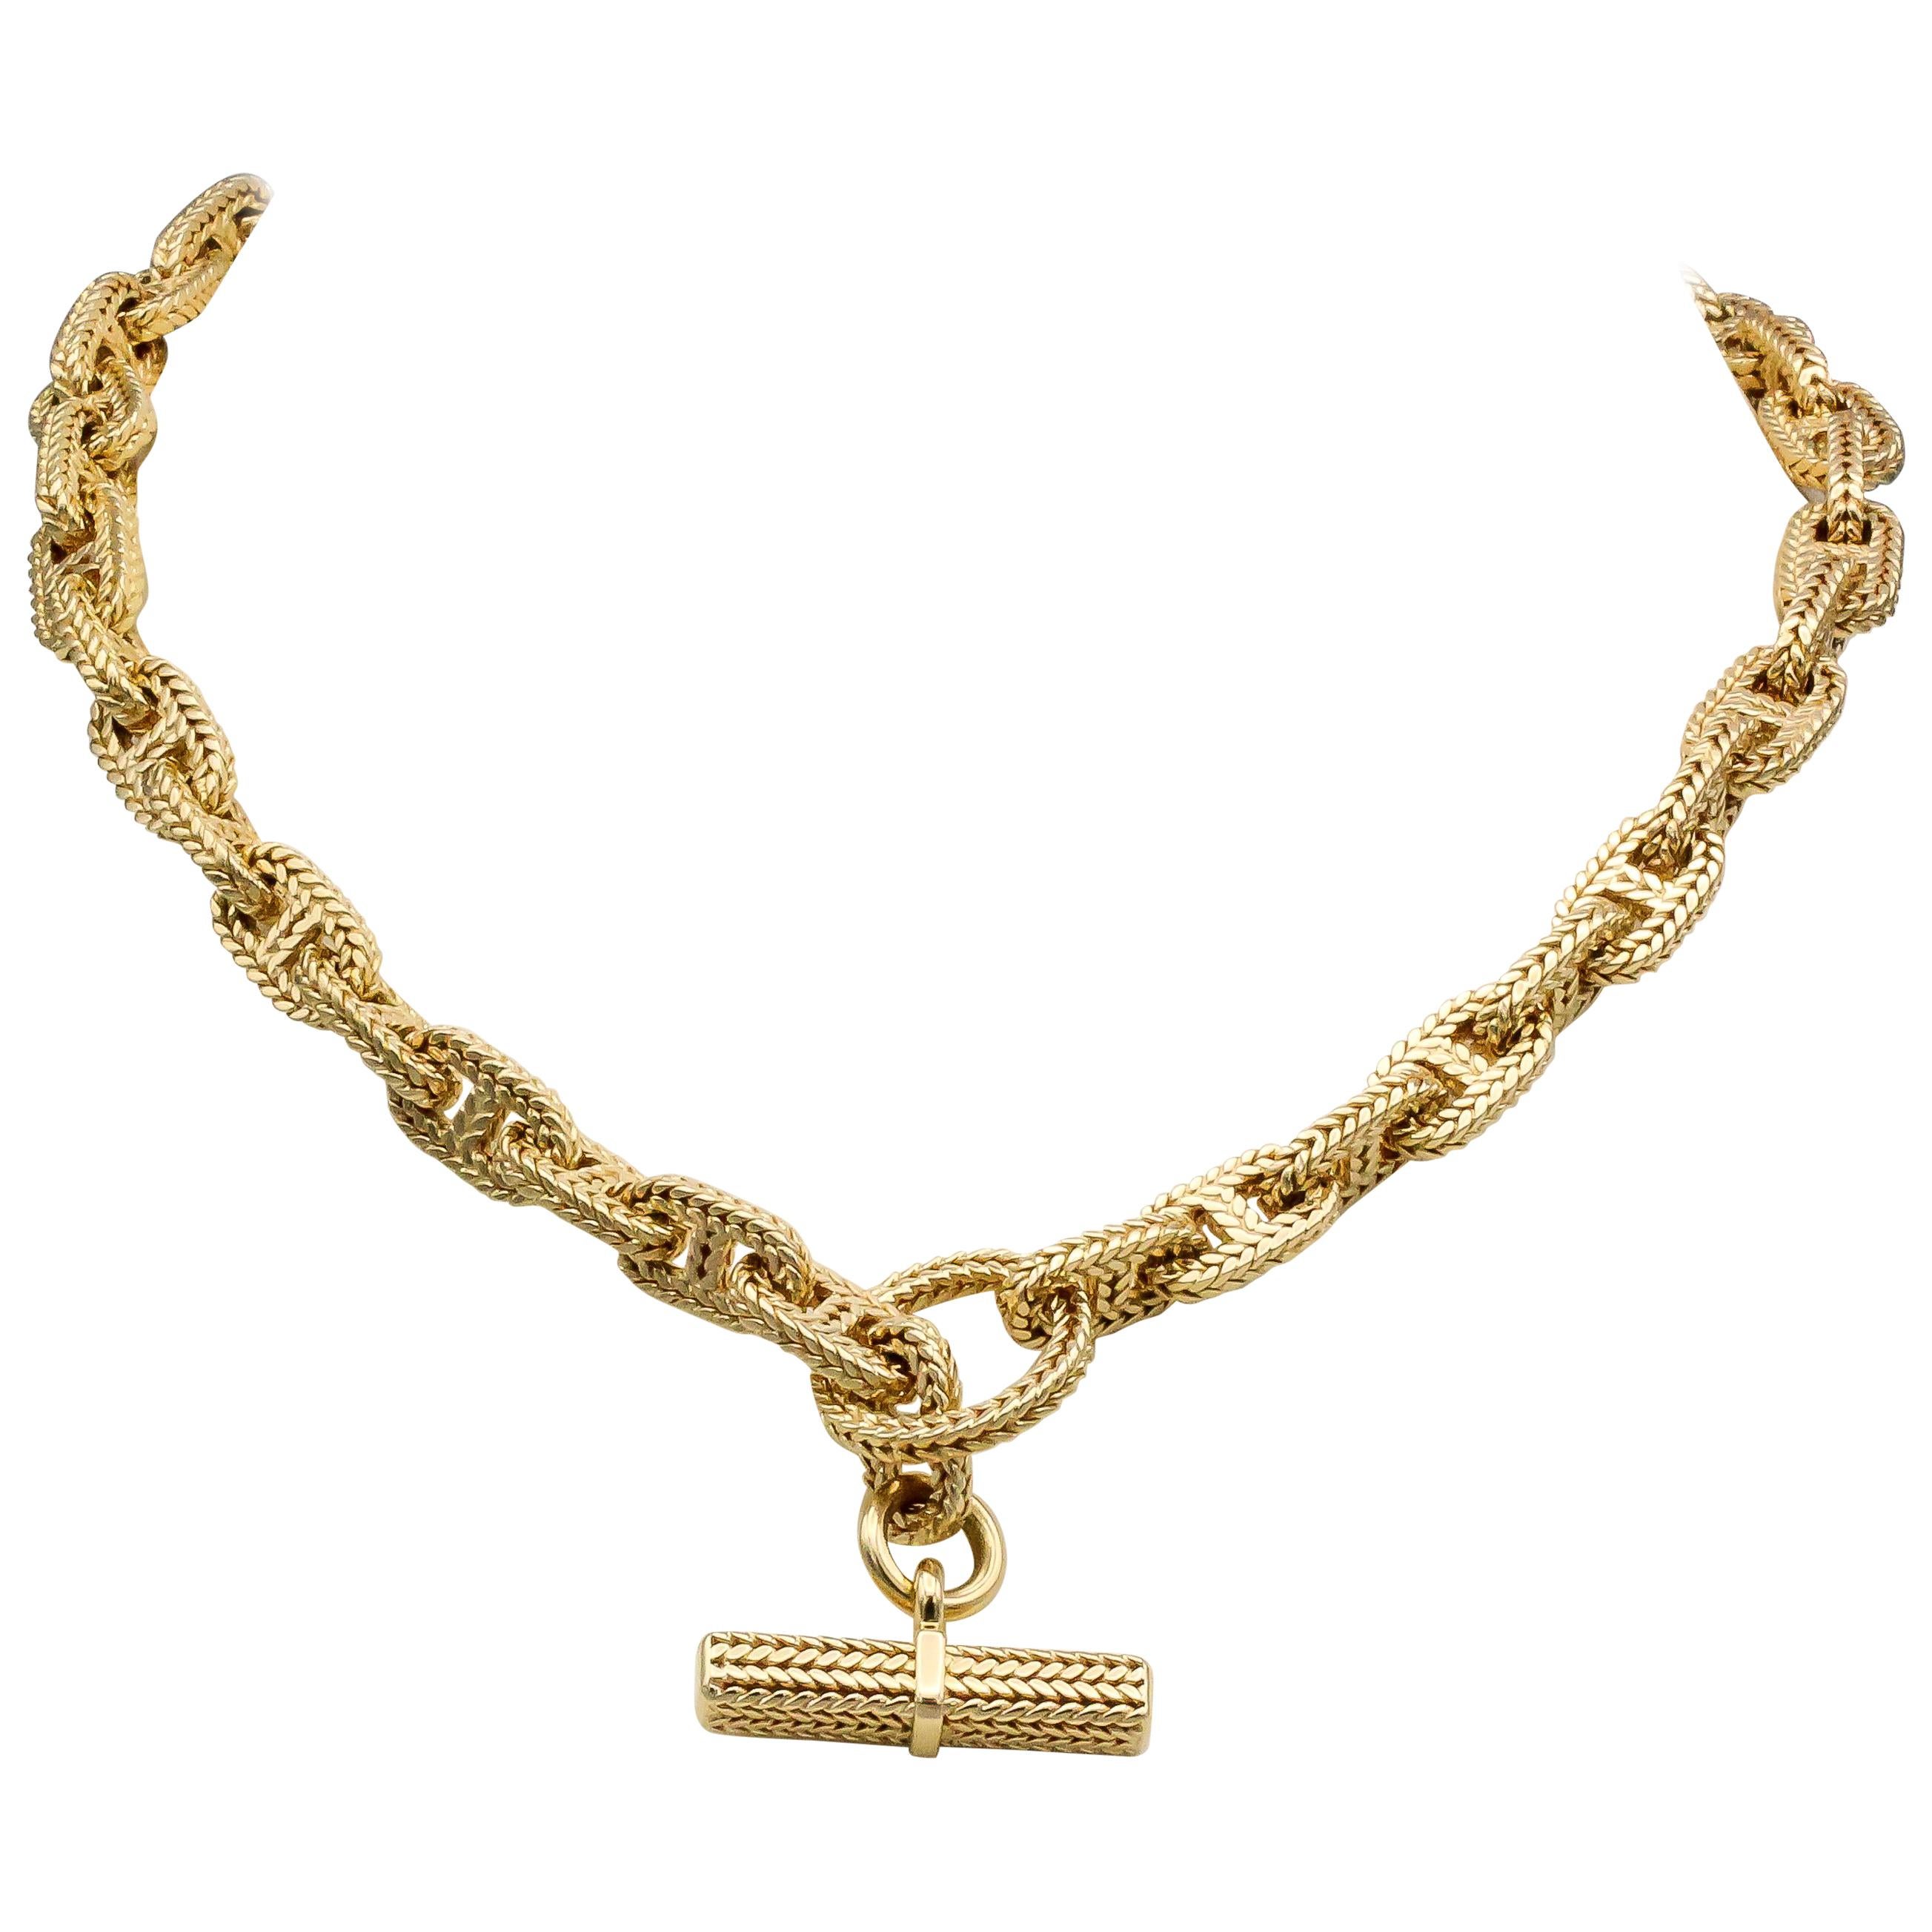 Hermes Chaine D'Ancre Tresse 18 Karat Gold Toggle Necklace